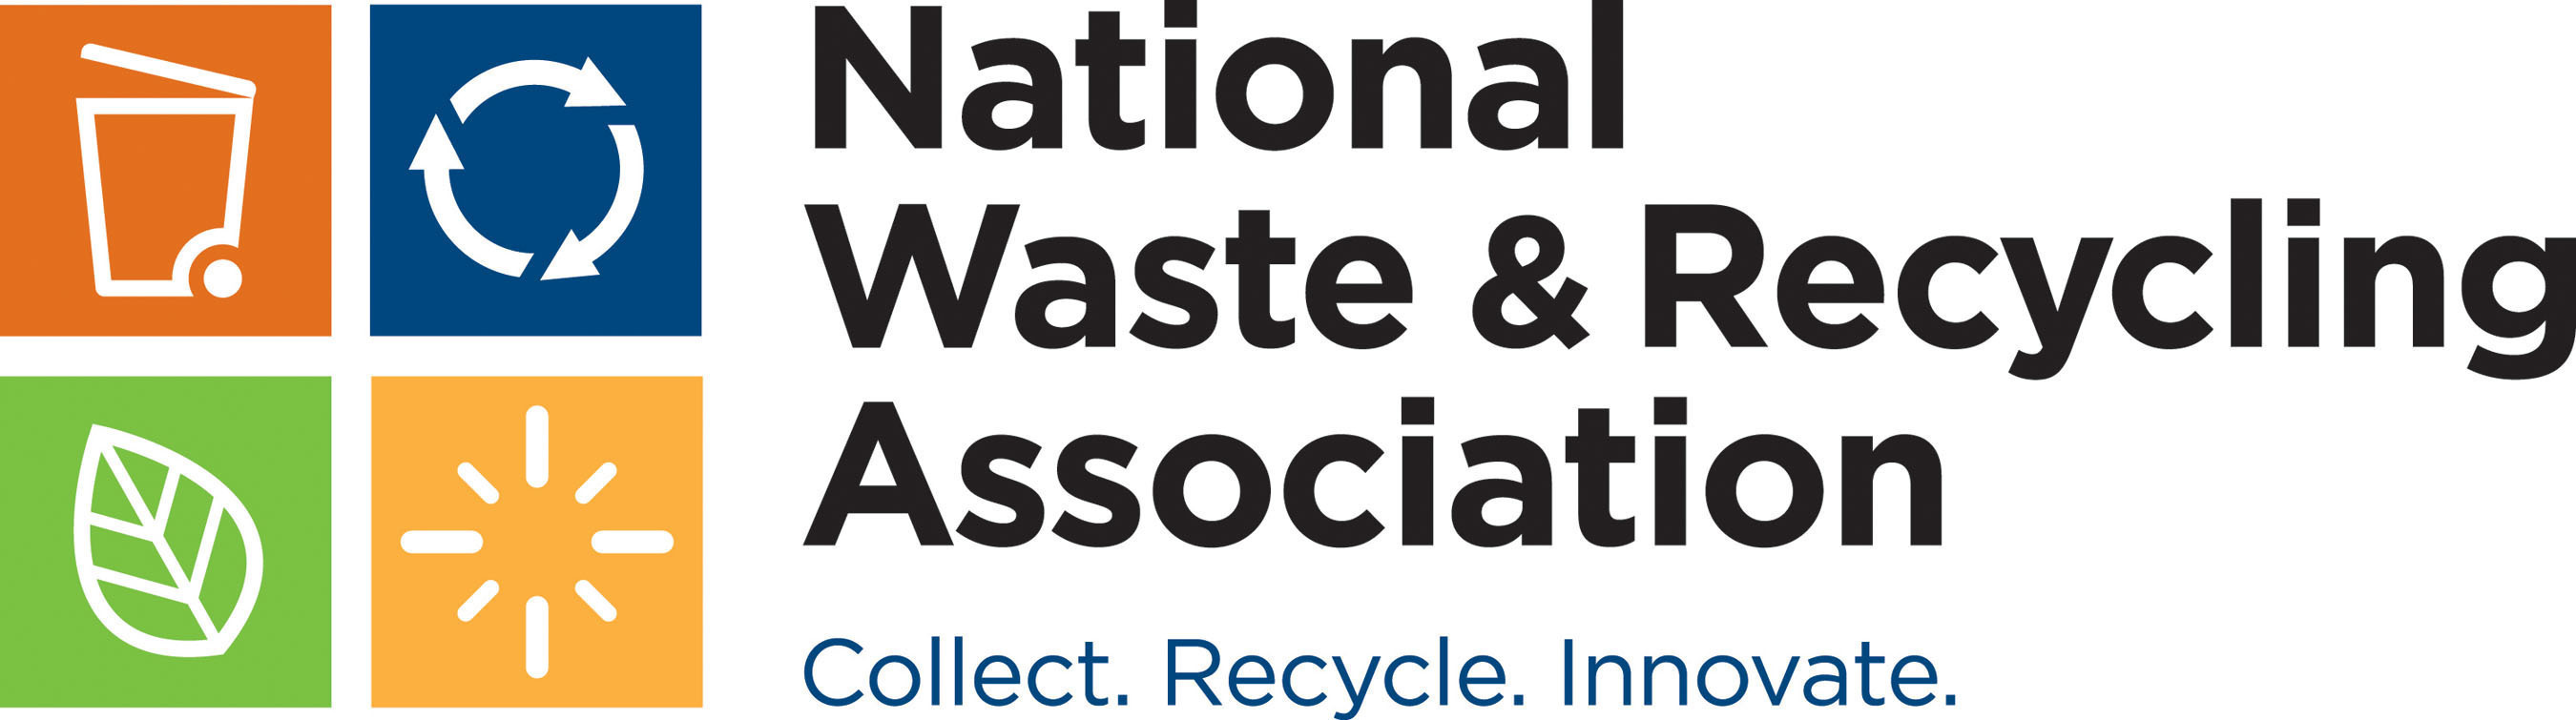 The National Waste & Recycling Association represents all things waste and recycling in the United States. Visit www.BeginWithTheBin.org for more information. (PRNewsFoto/National Waste & Recycling Association) (PRNewsFoto/NATIONAL WASTE & RECYCLING ...)